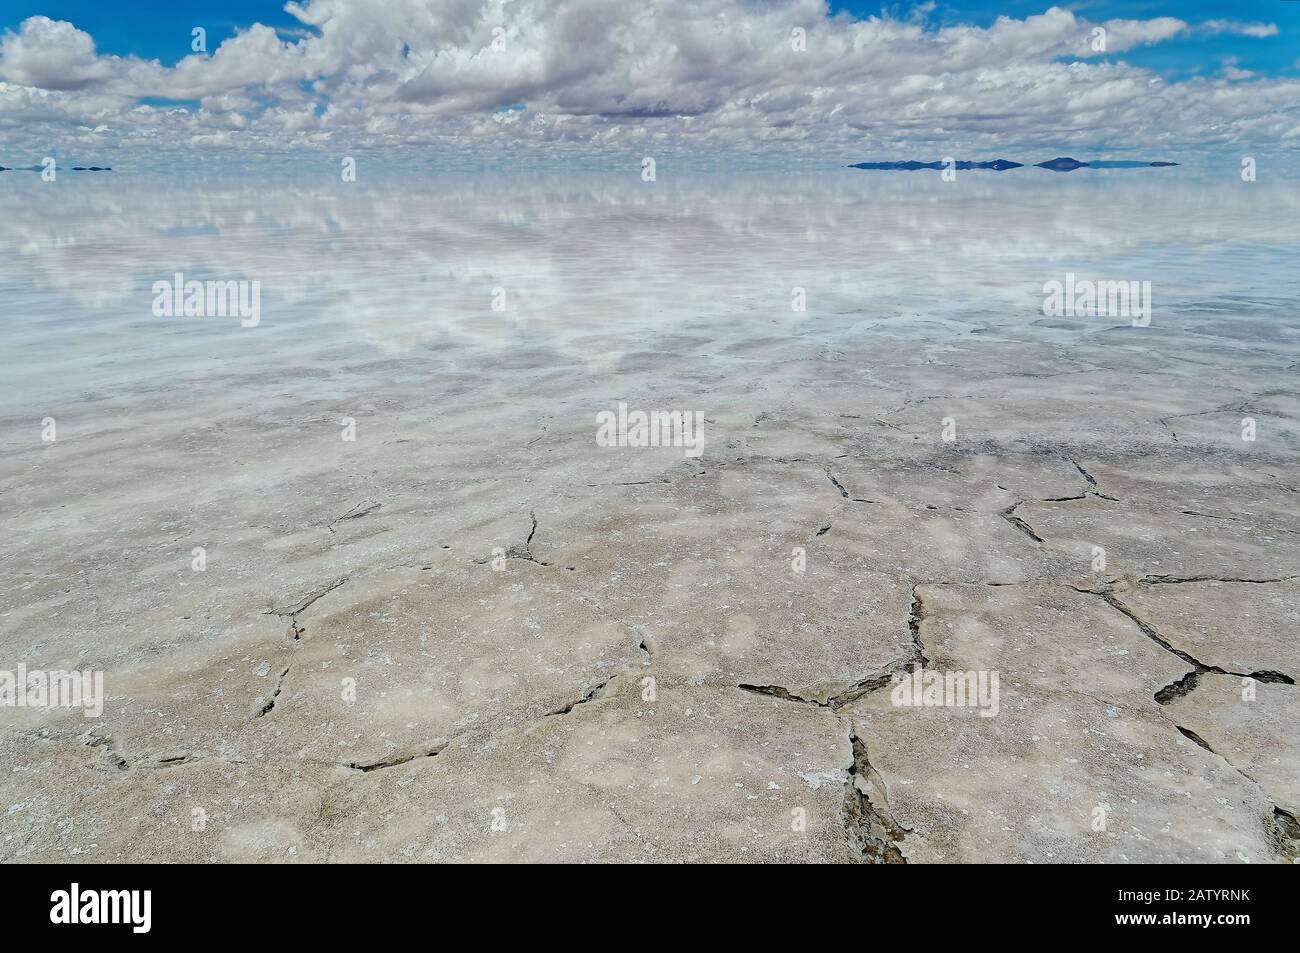 An exploration day over Uyuni salt flat, can show amazing sky's reflections over flooded salt flat, such beautiful images extends on endless horizon. Stock Photo